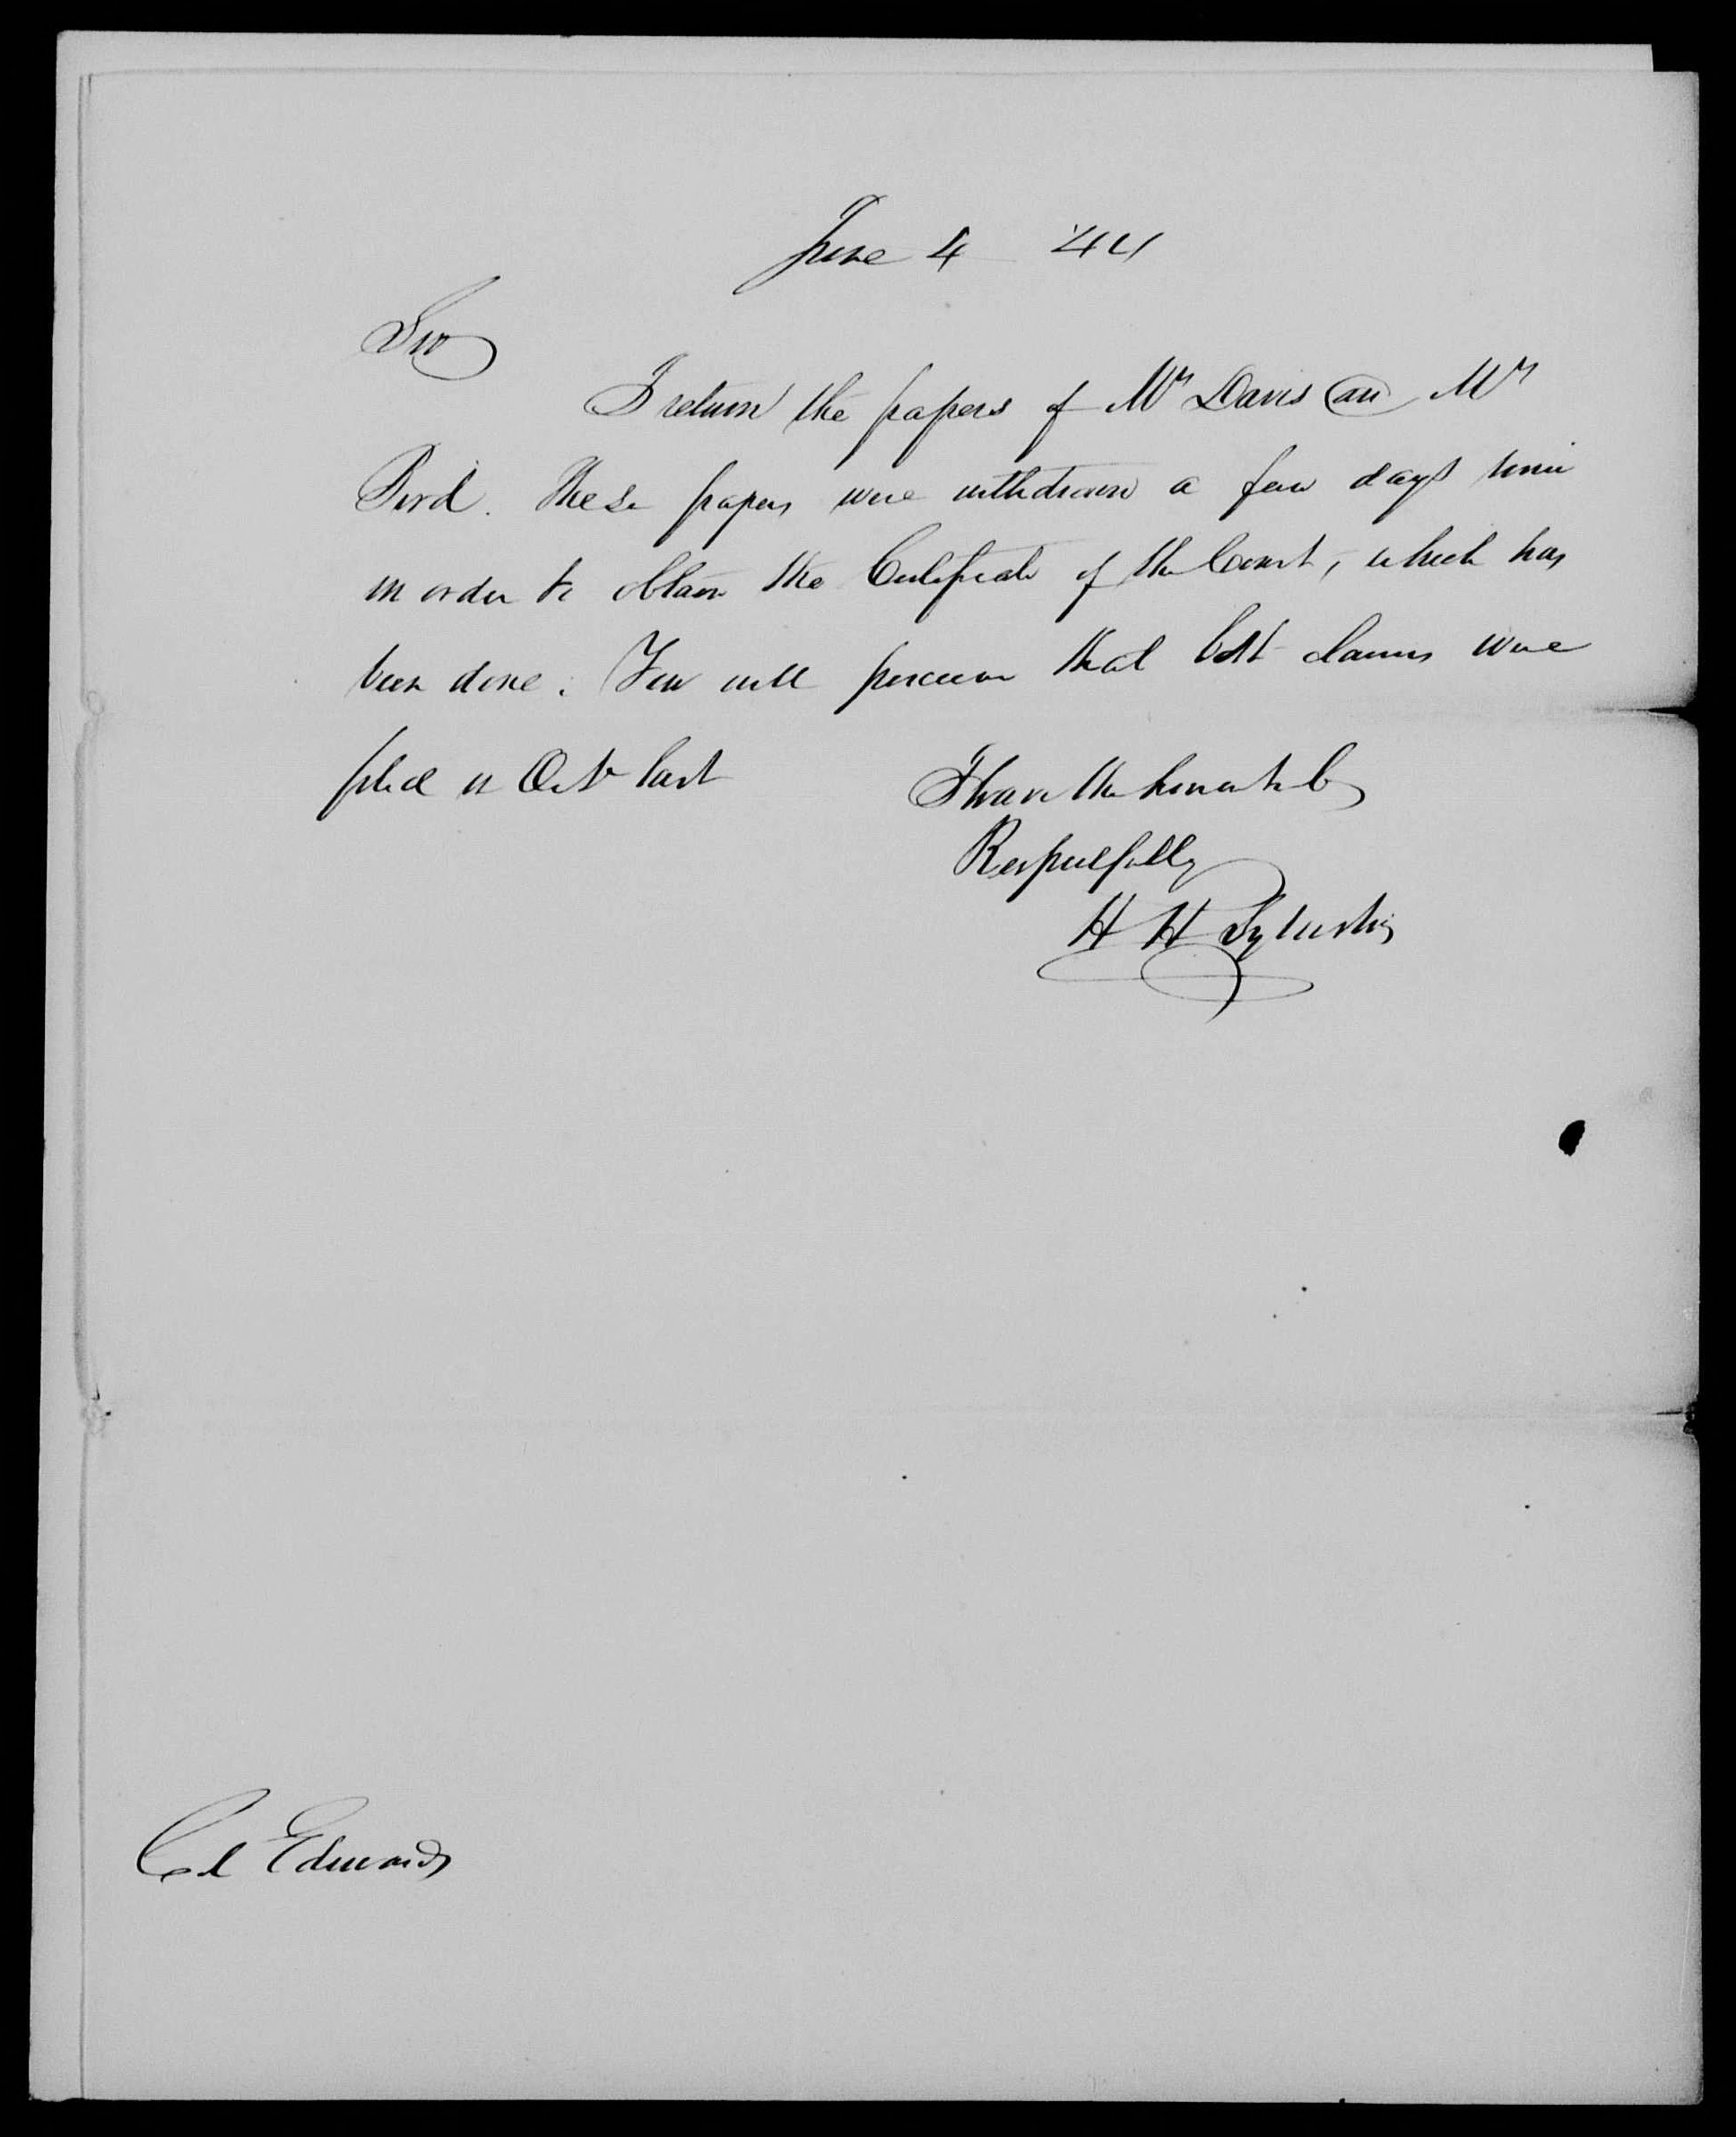 Letter from Henry H. Sylvester to J. L. Edwards, 4 June 1844, page 1